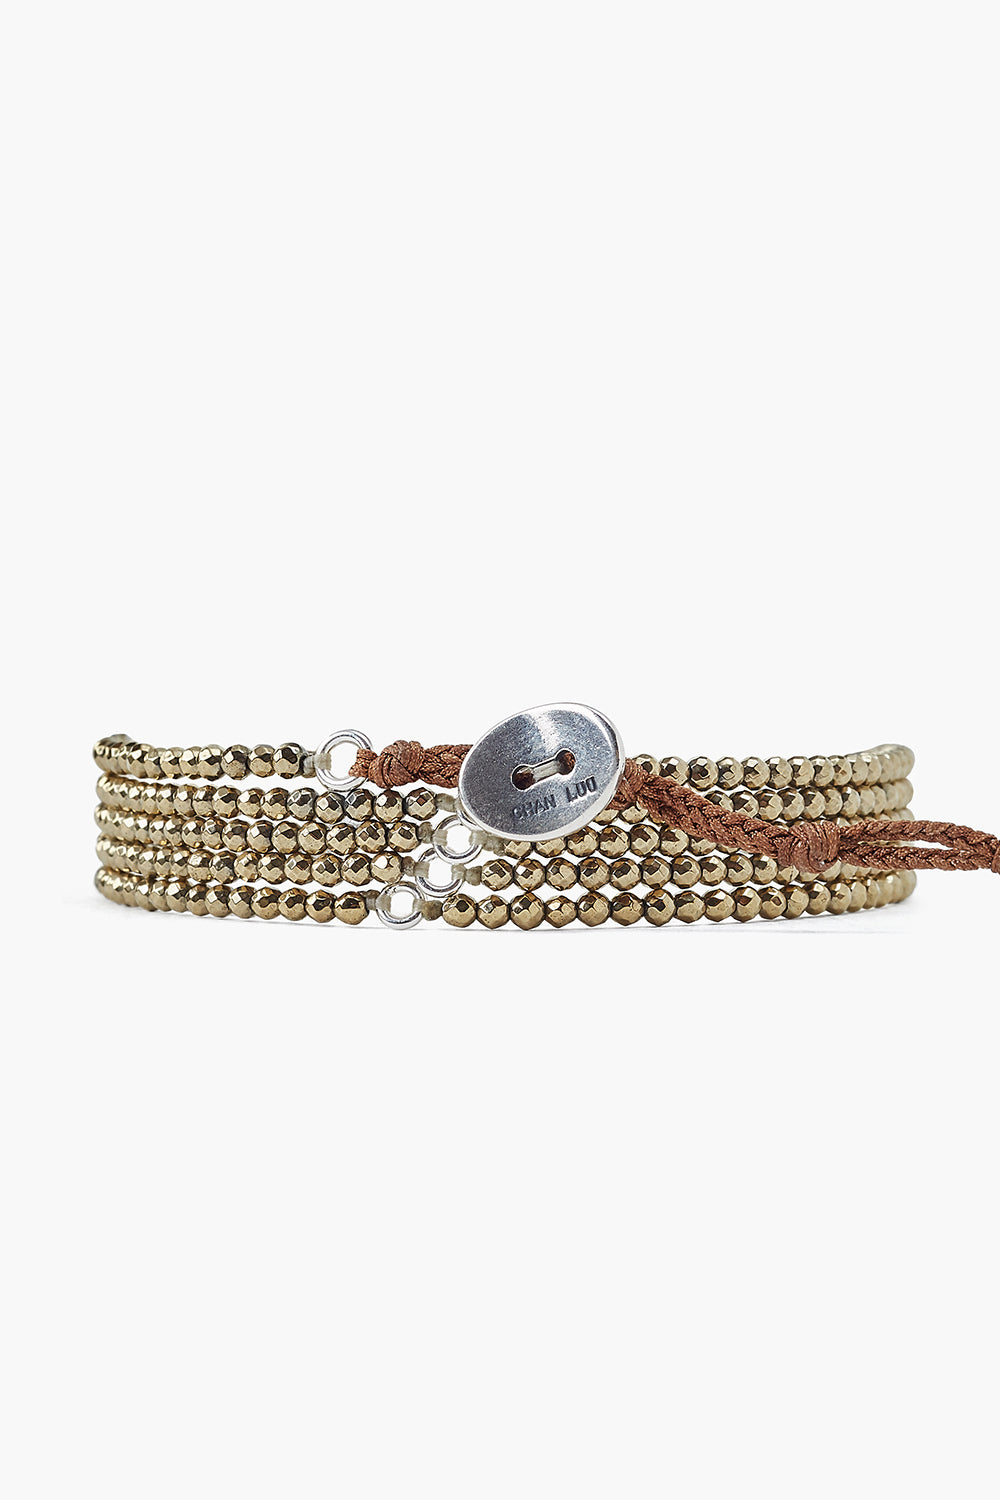 PYRITE BEADED 5 LAYER BRACELET - Kingfisher Road - Online Boutique